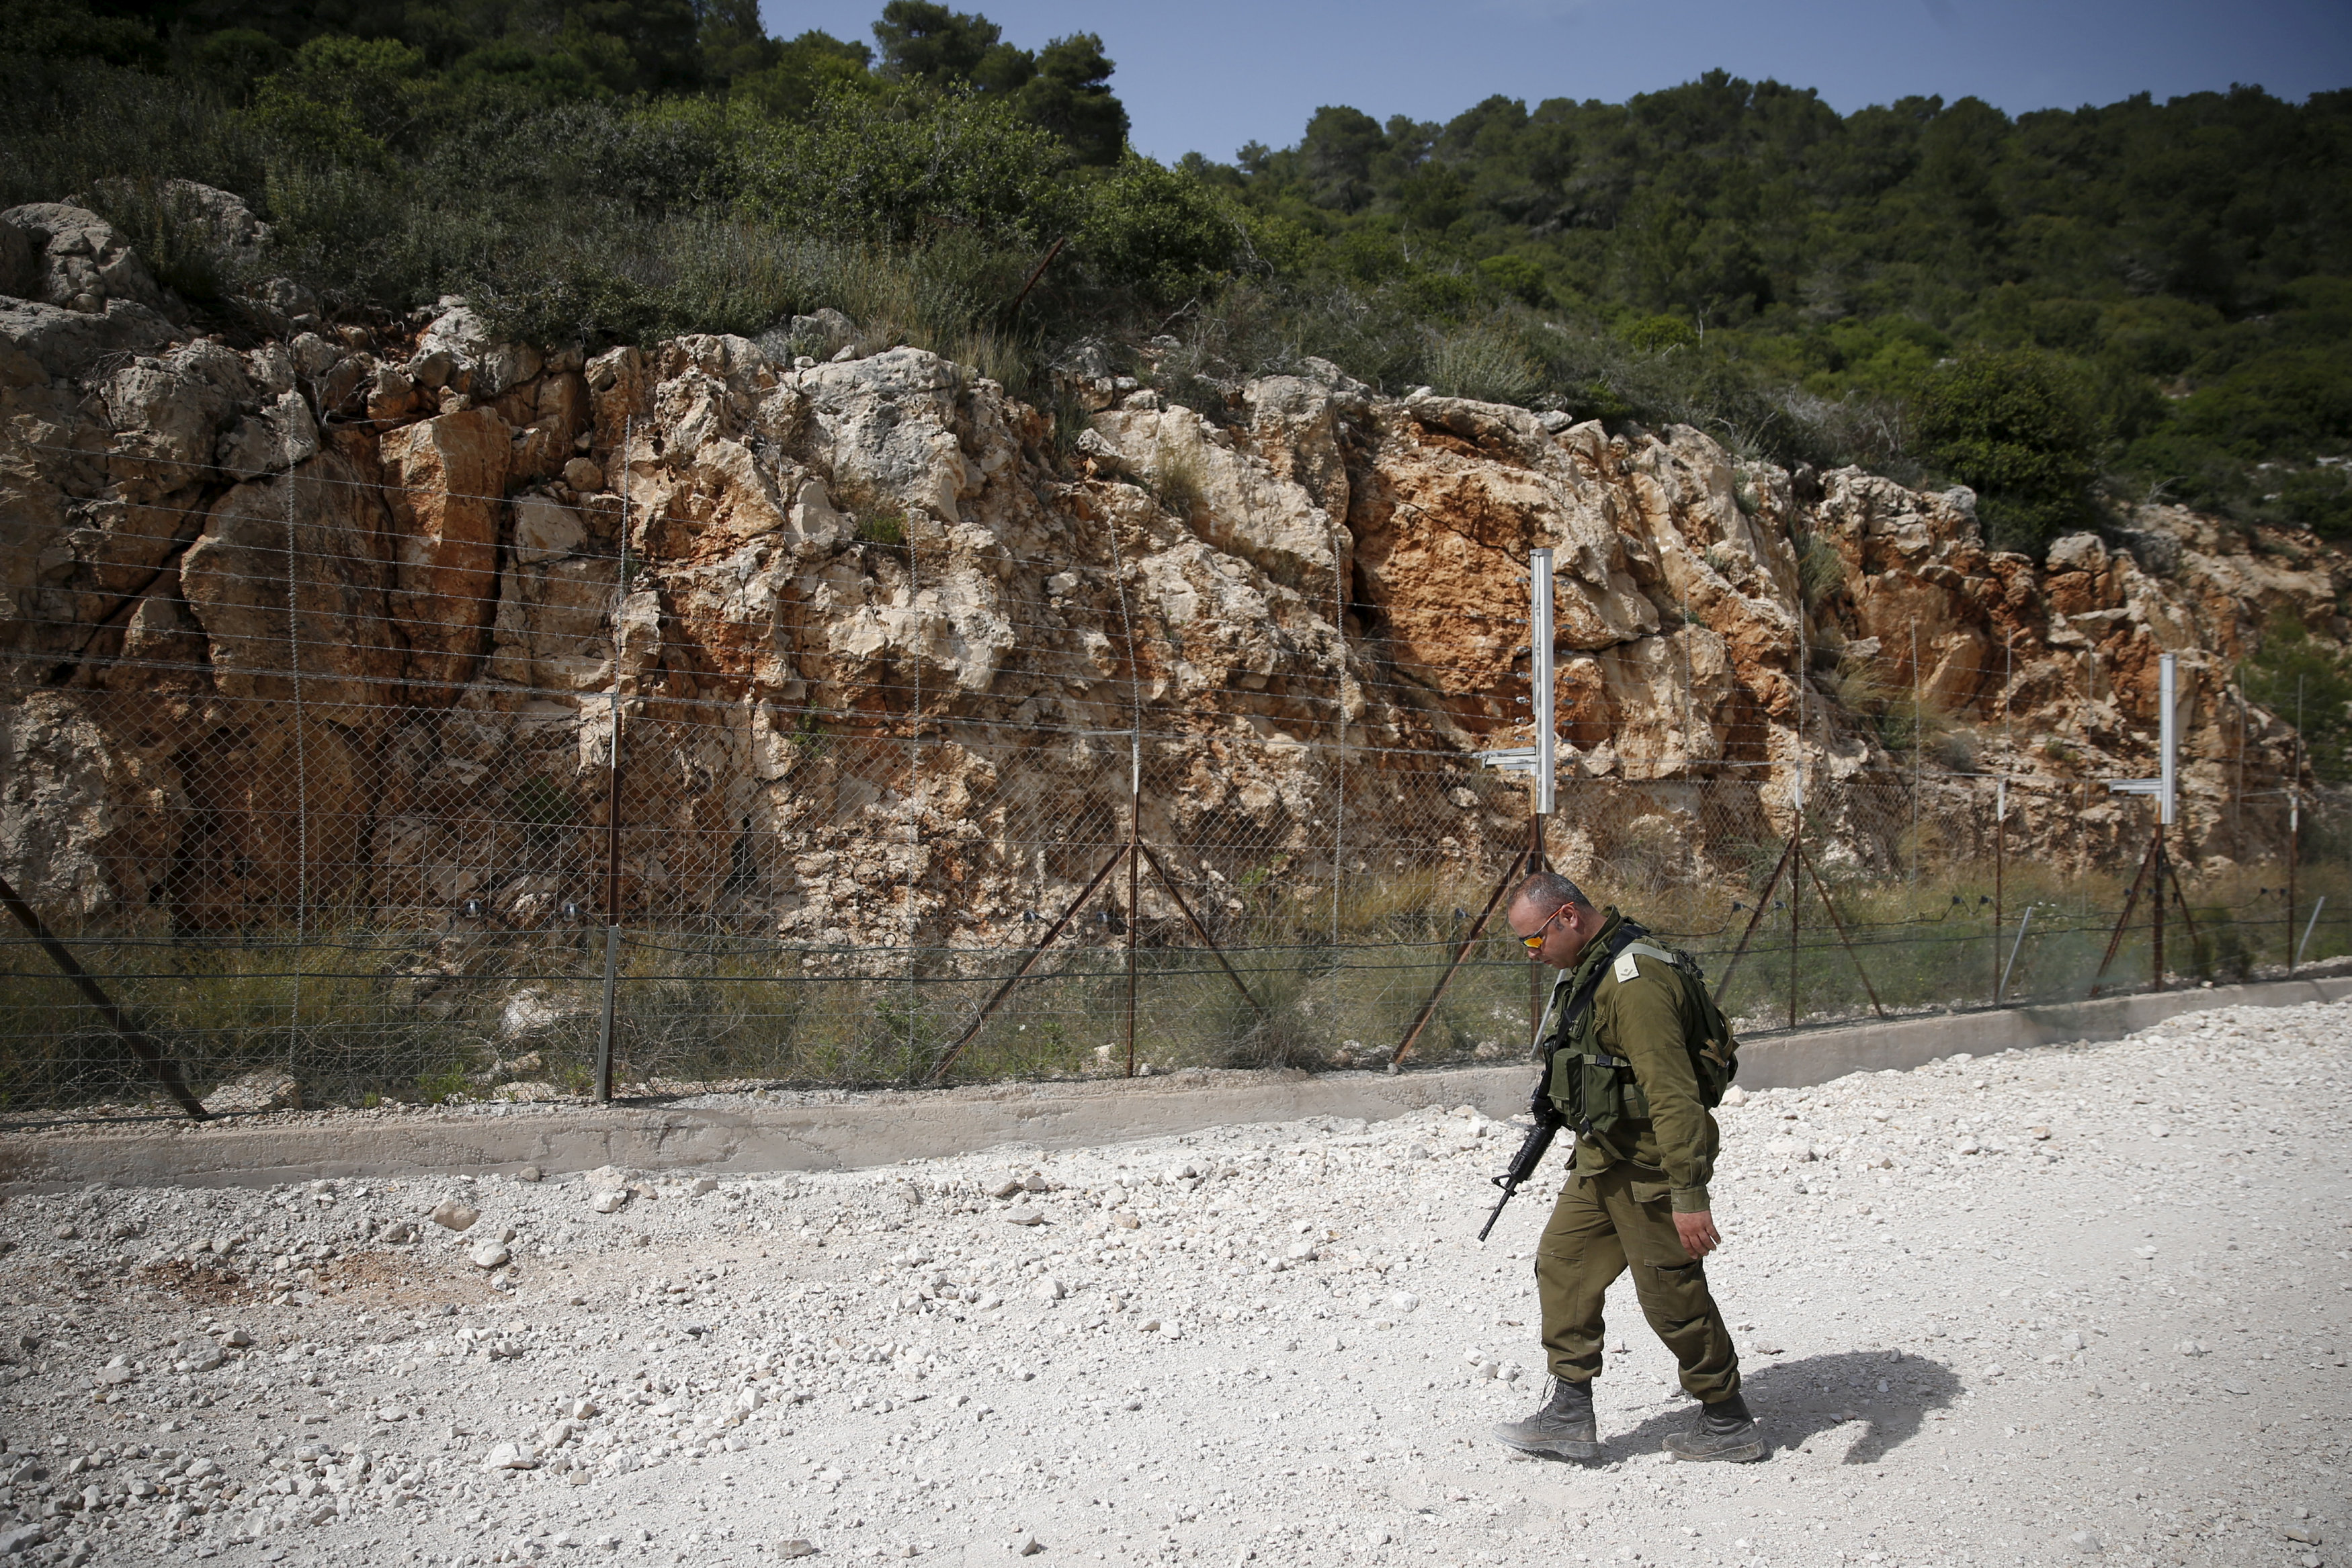 FILE PHOTO: An Israeli soldier walks near the area where the Israeli army is excavating part of a cliff to create an additional barrier along its border with Lebanon, near the community of Shlomi in northern Israel